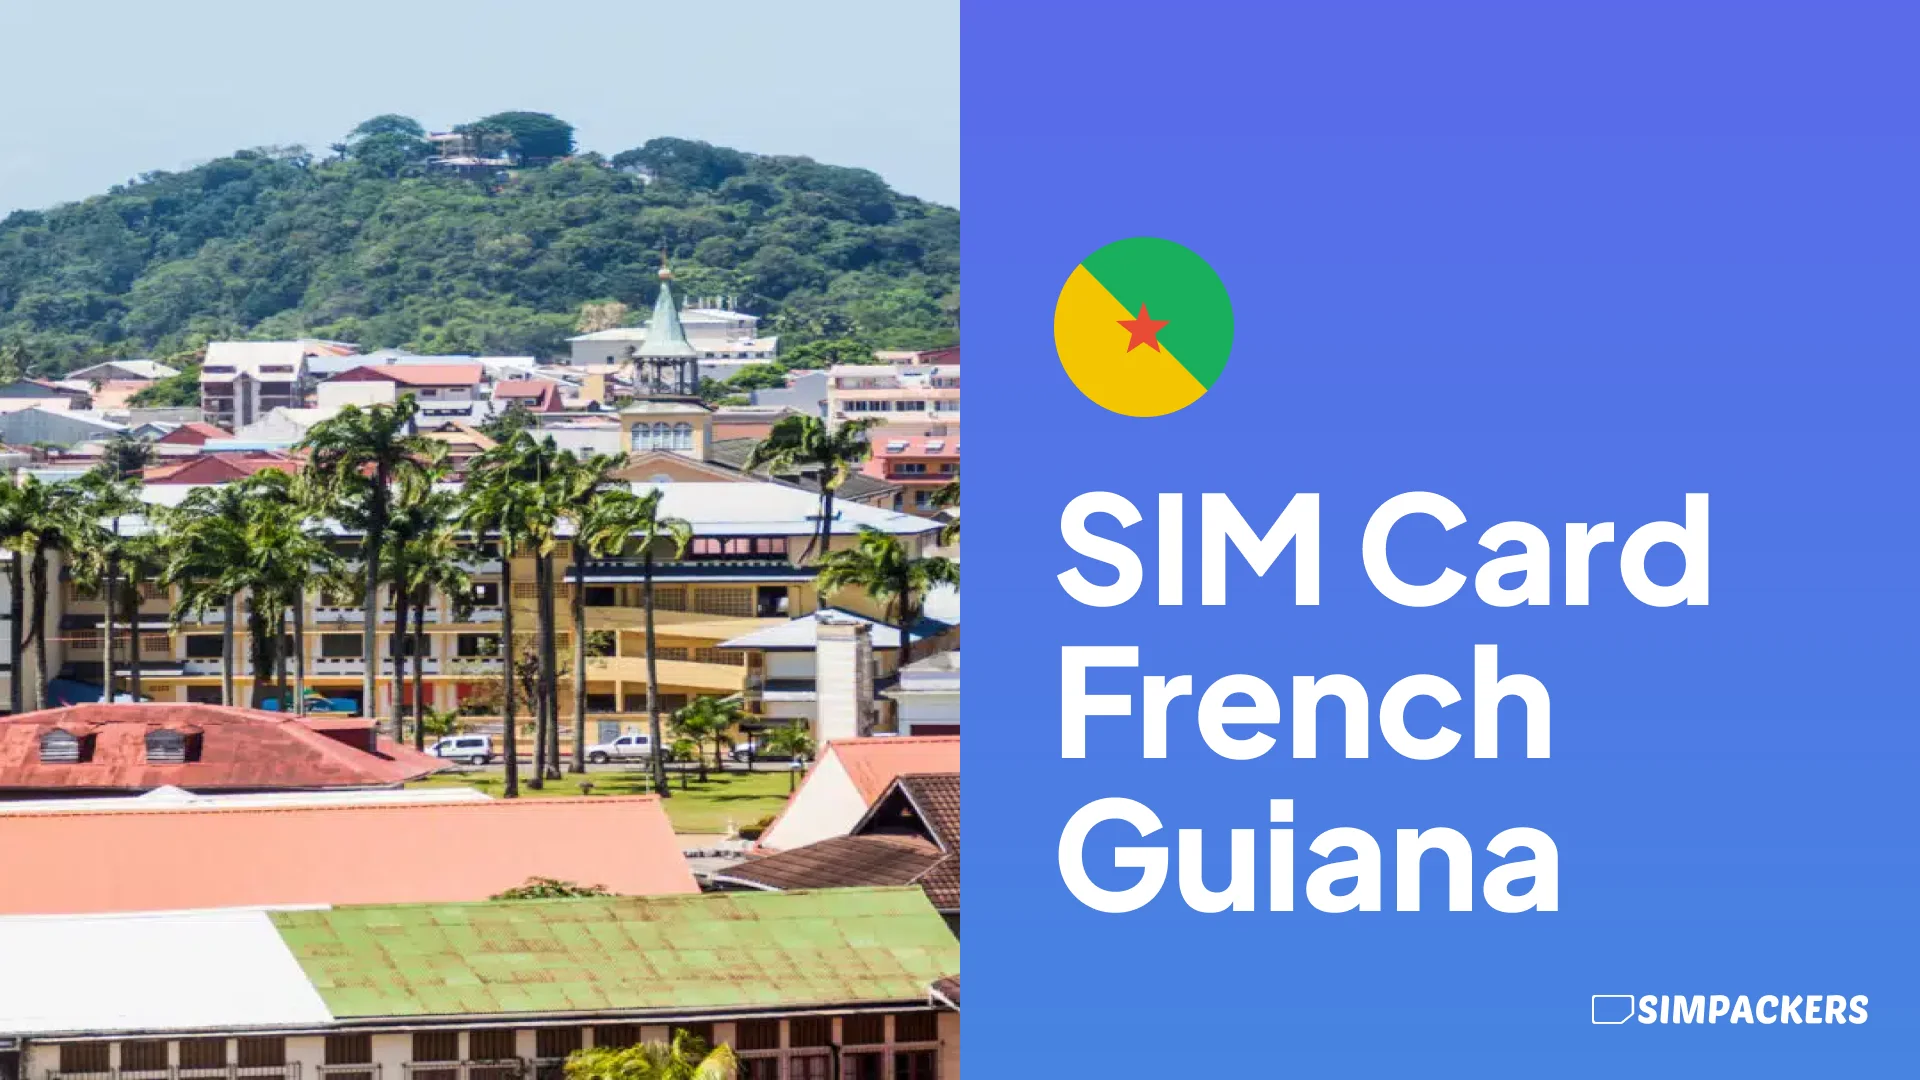 EN/FEATURED_IMAGES/sim-card-french-guiana.webp